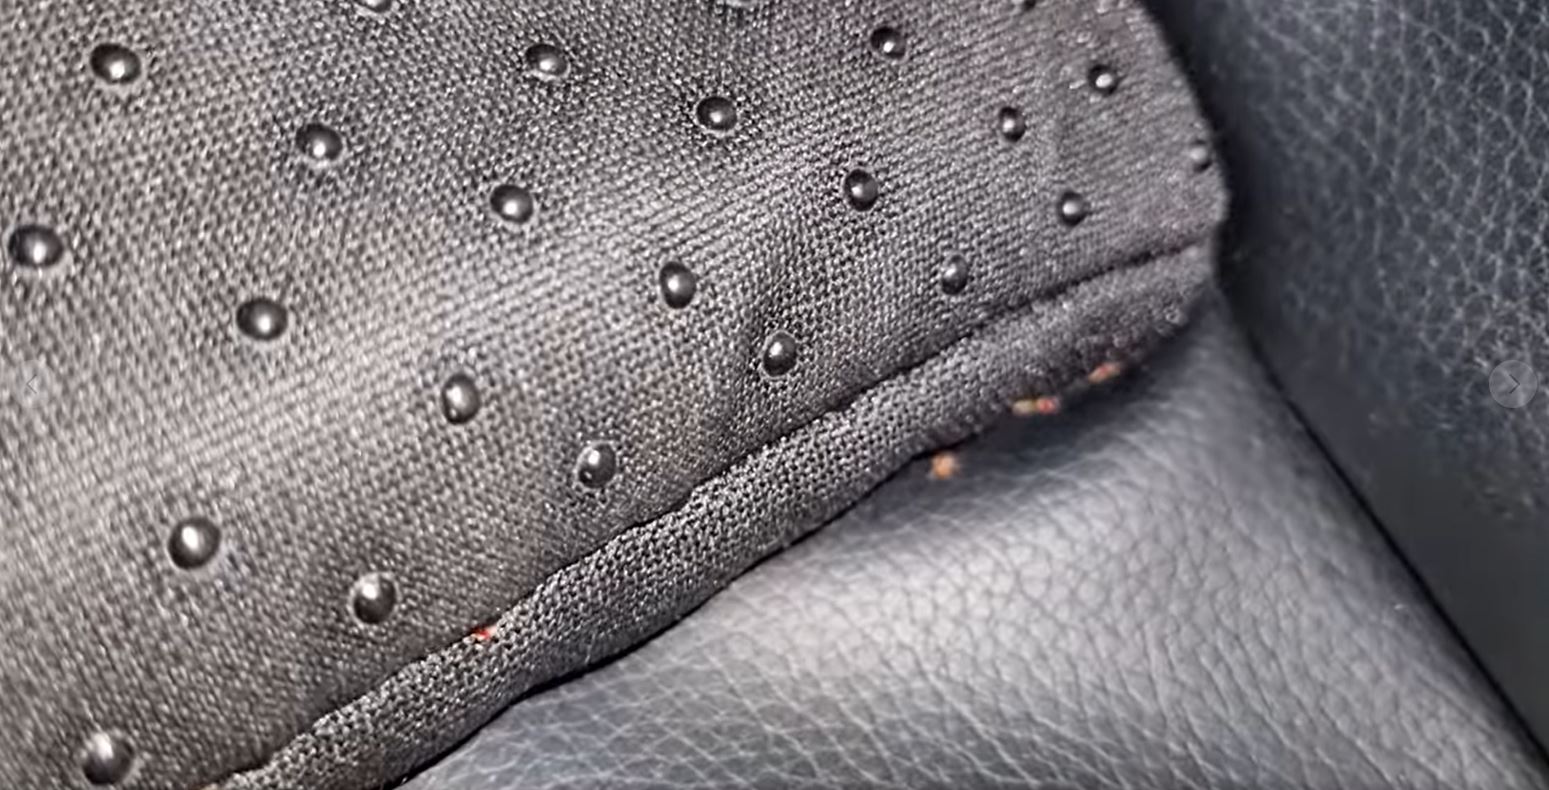 Man allegedly bitten by bed bugs in massage chair at harbourfront